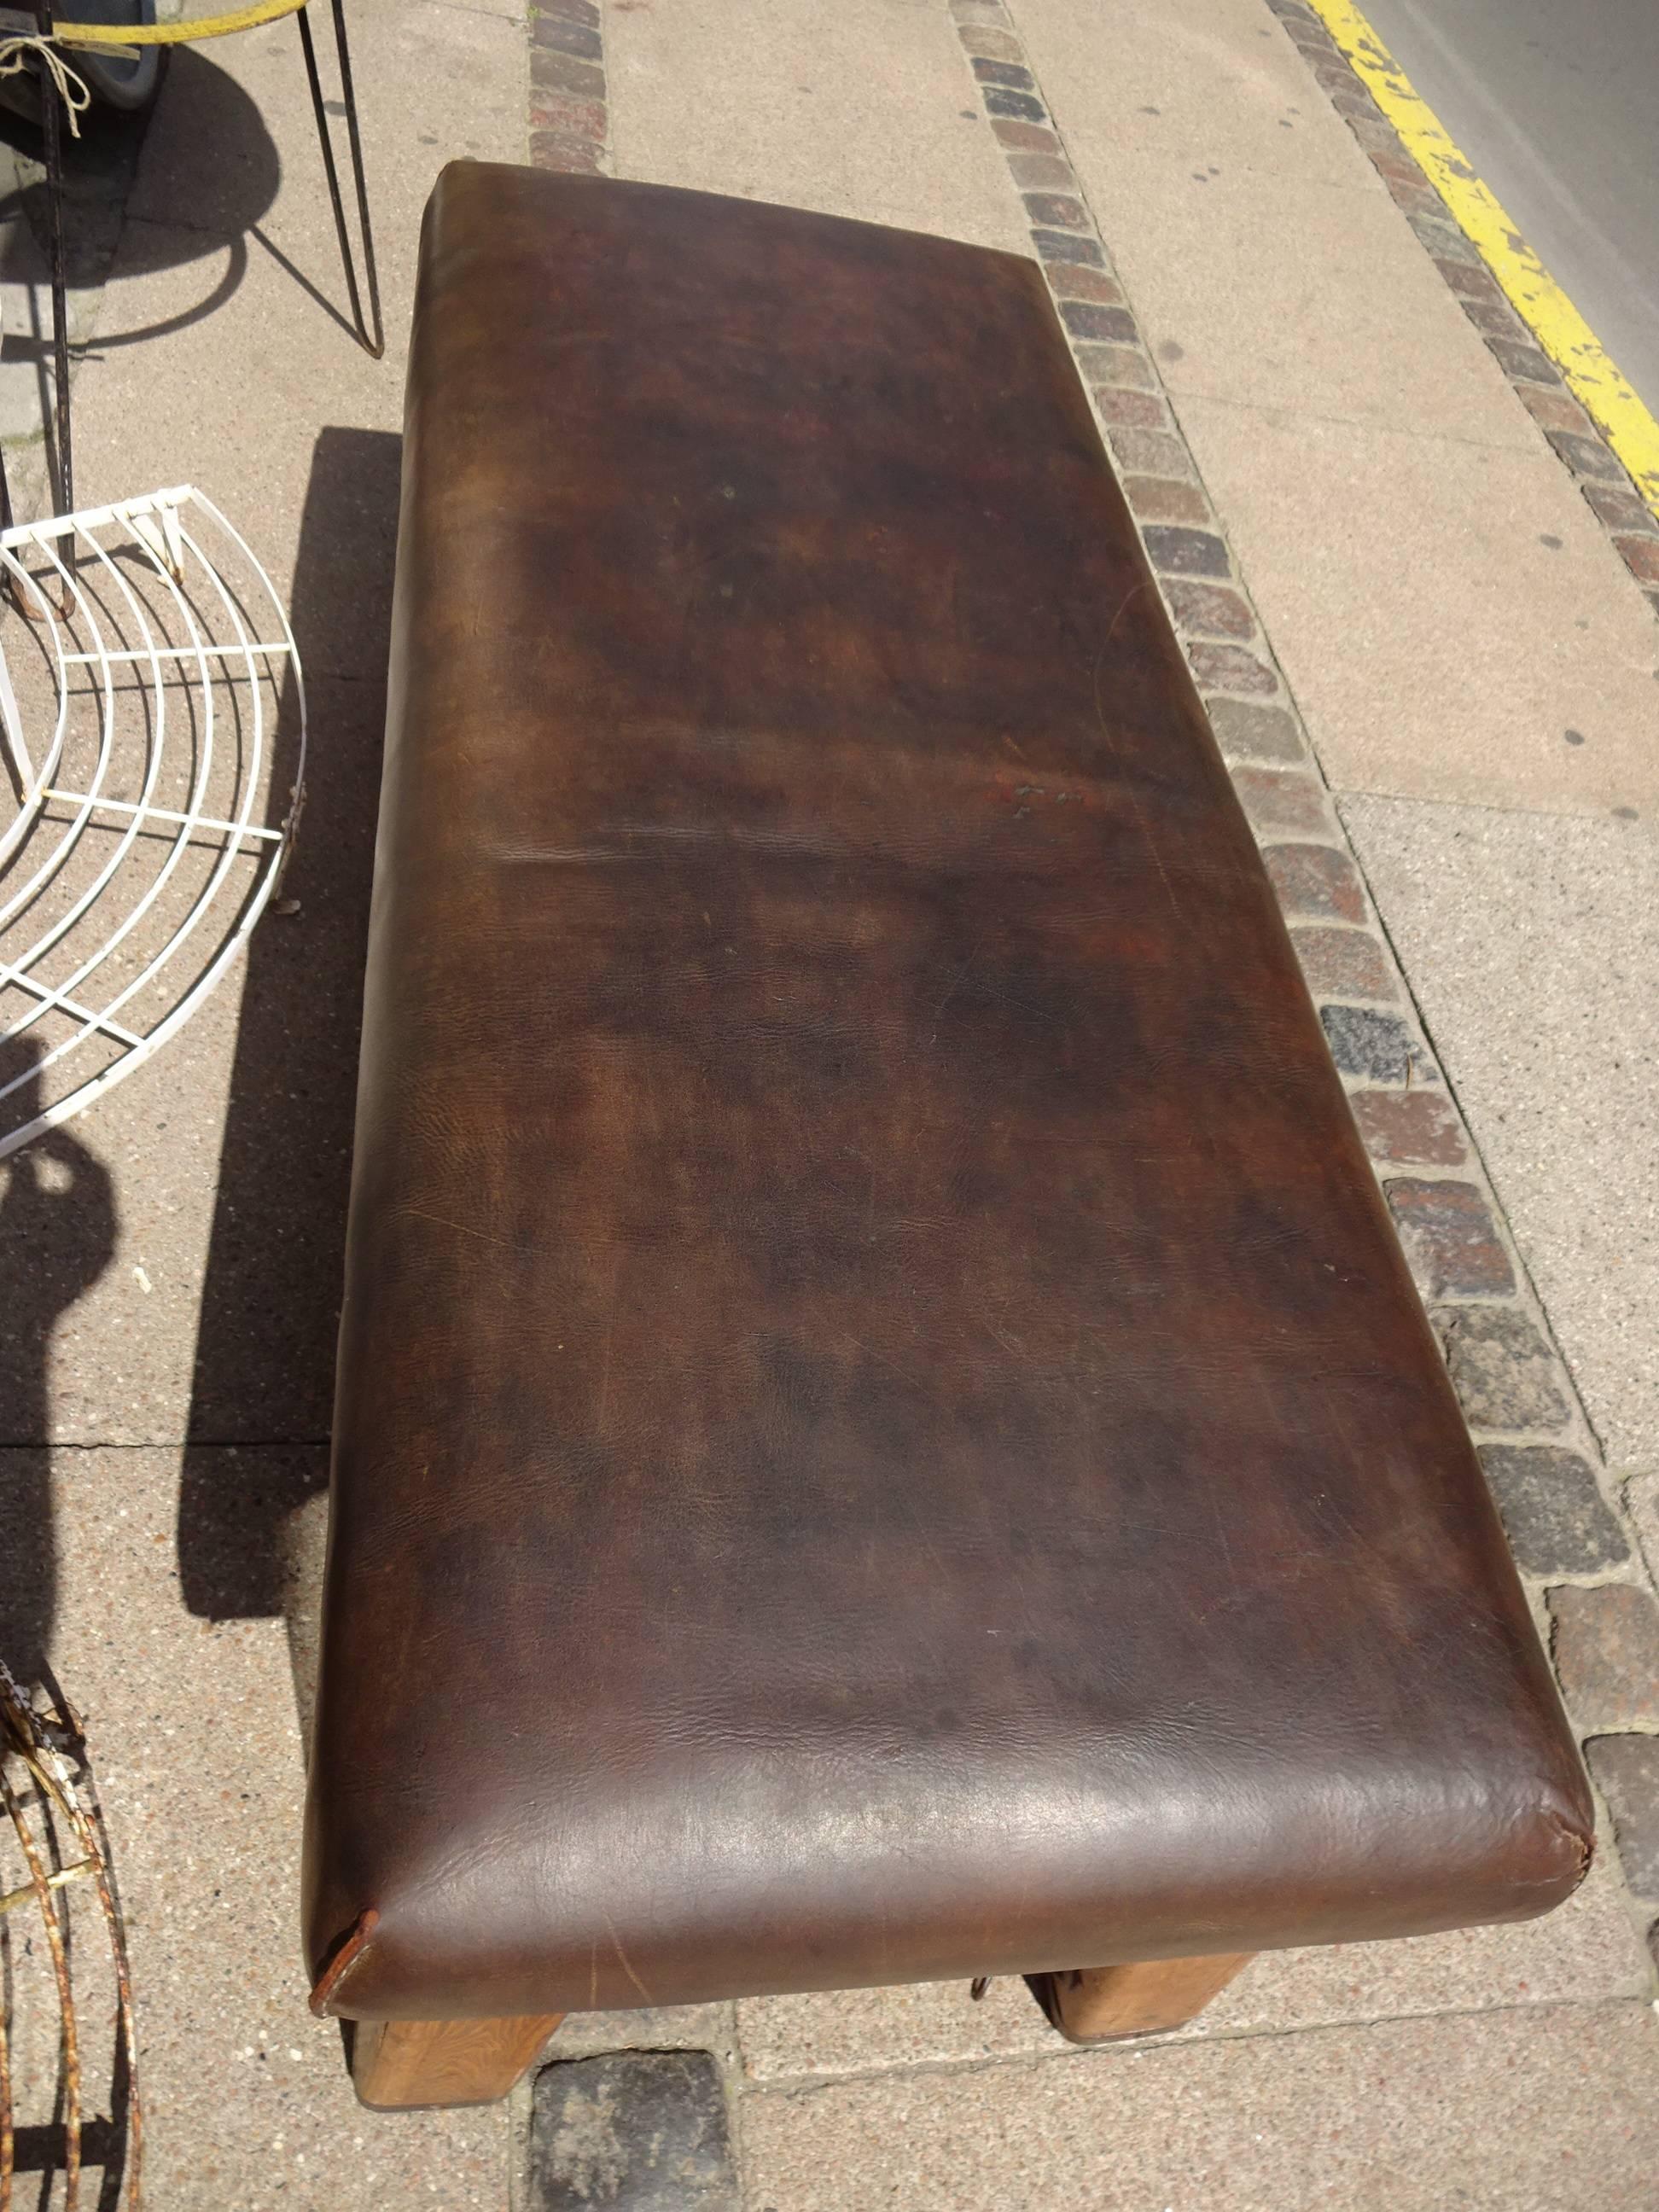 Other Early 20th Century Gymnastic Leather Bench